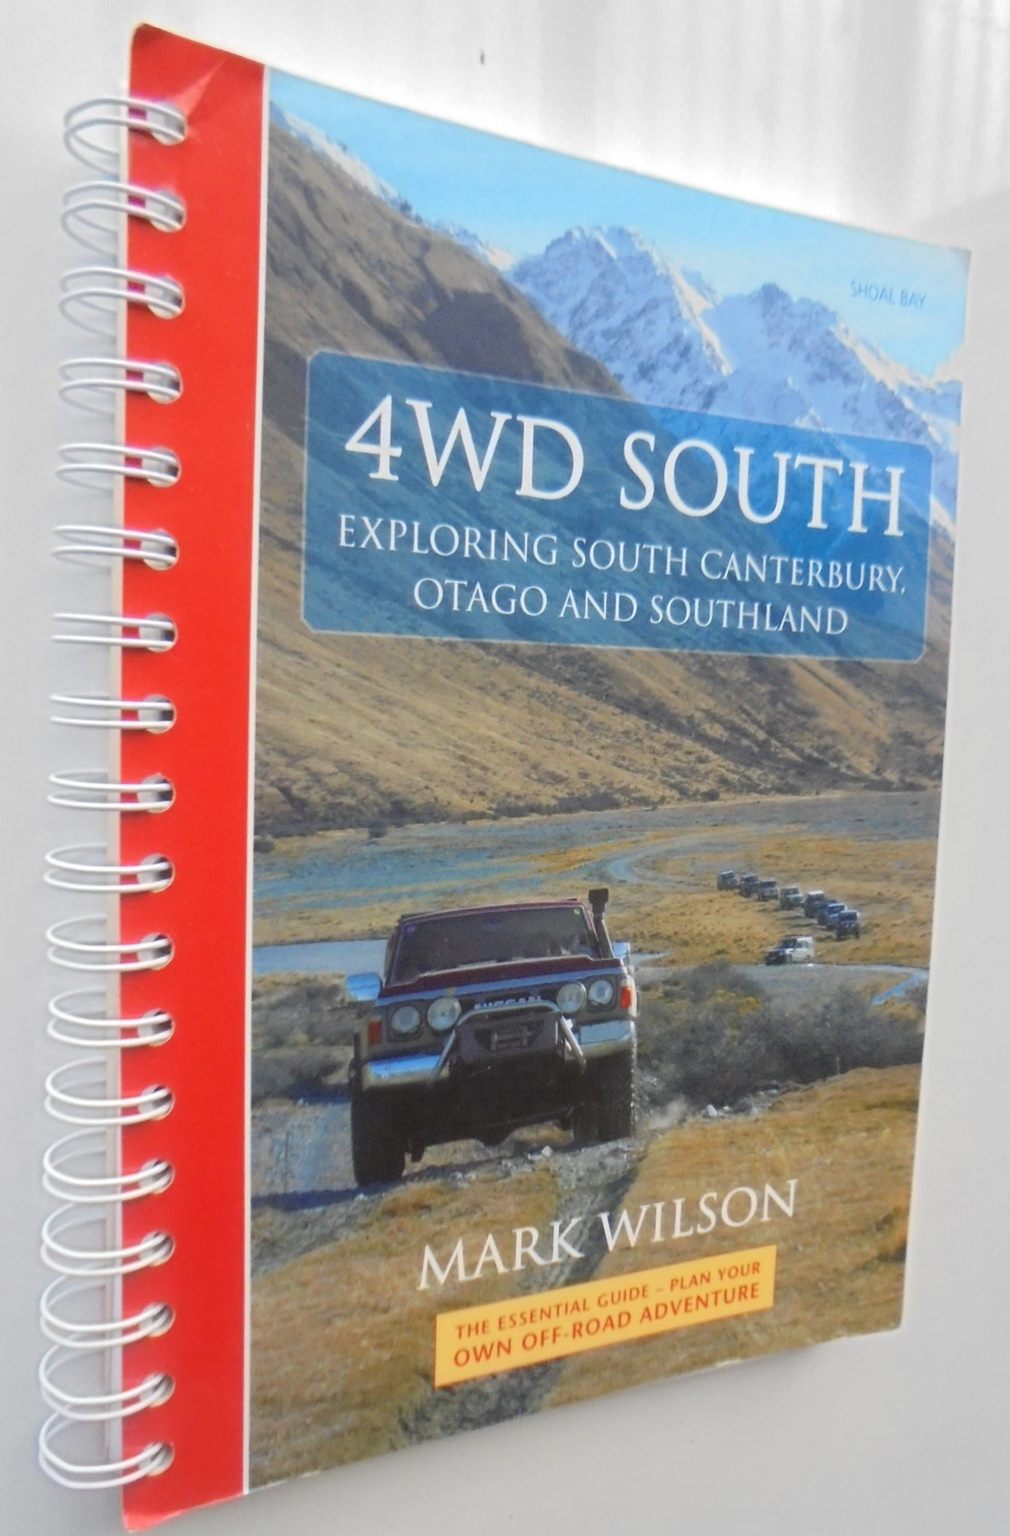 4WD South Exploring South Canterbury, Otago and Southland By Mark Wilson